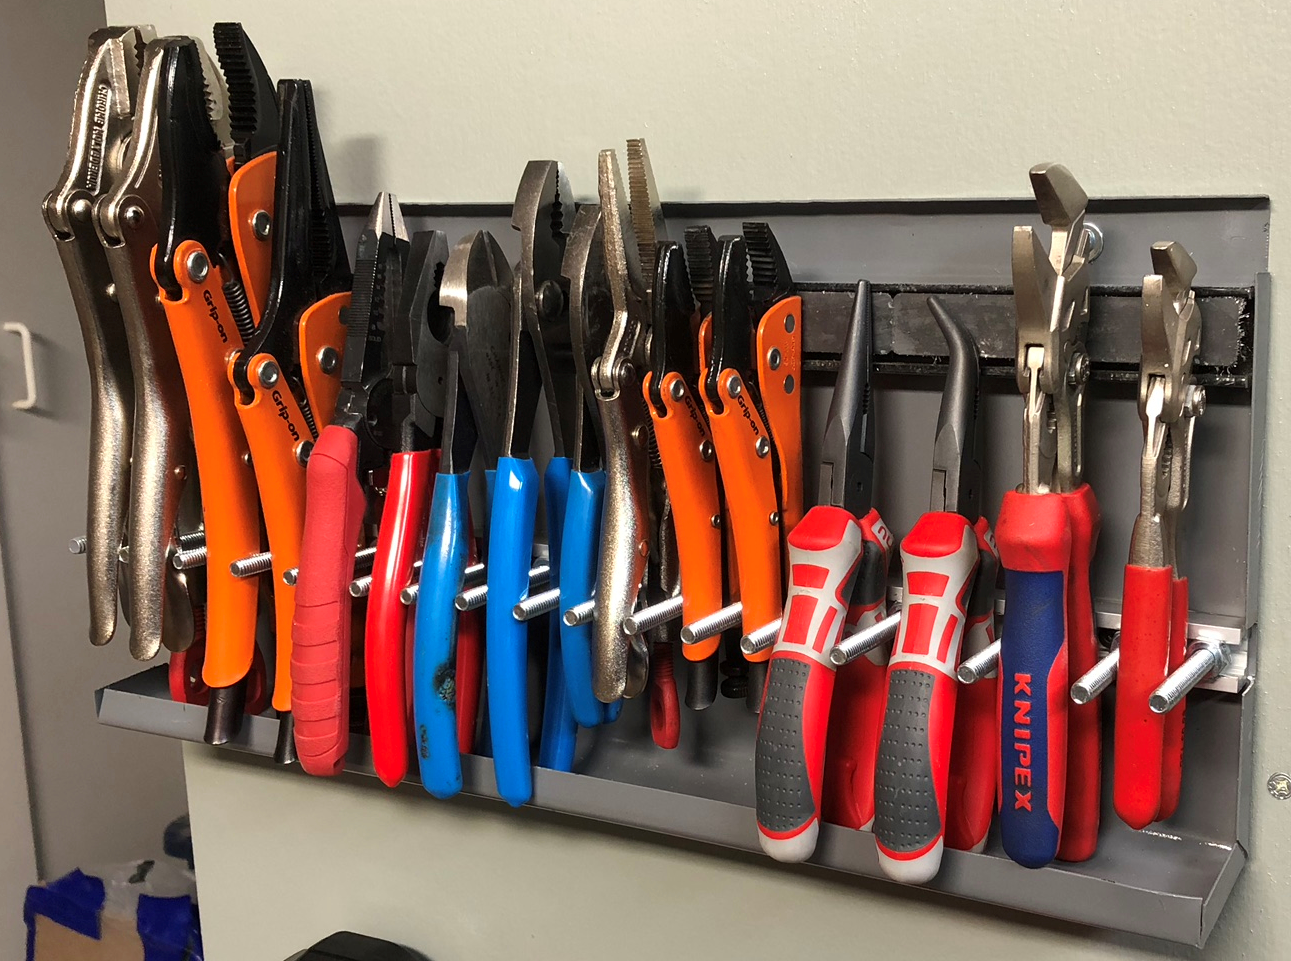 Pliers/Wrench Rack